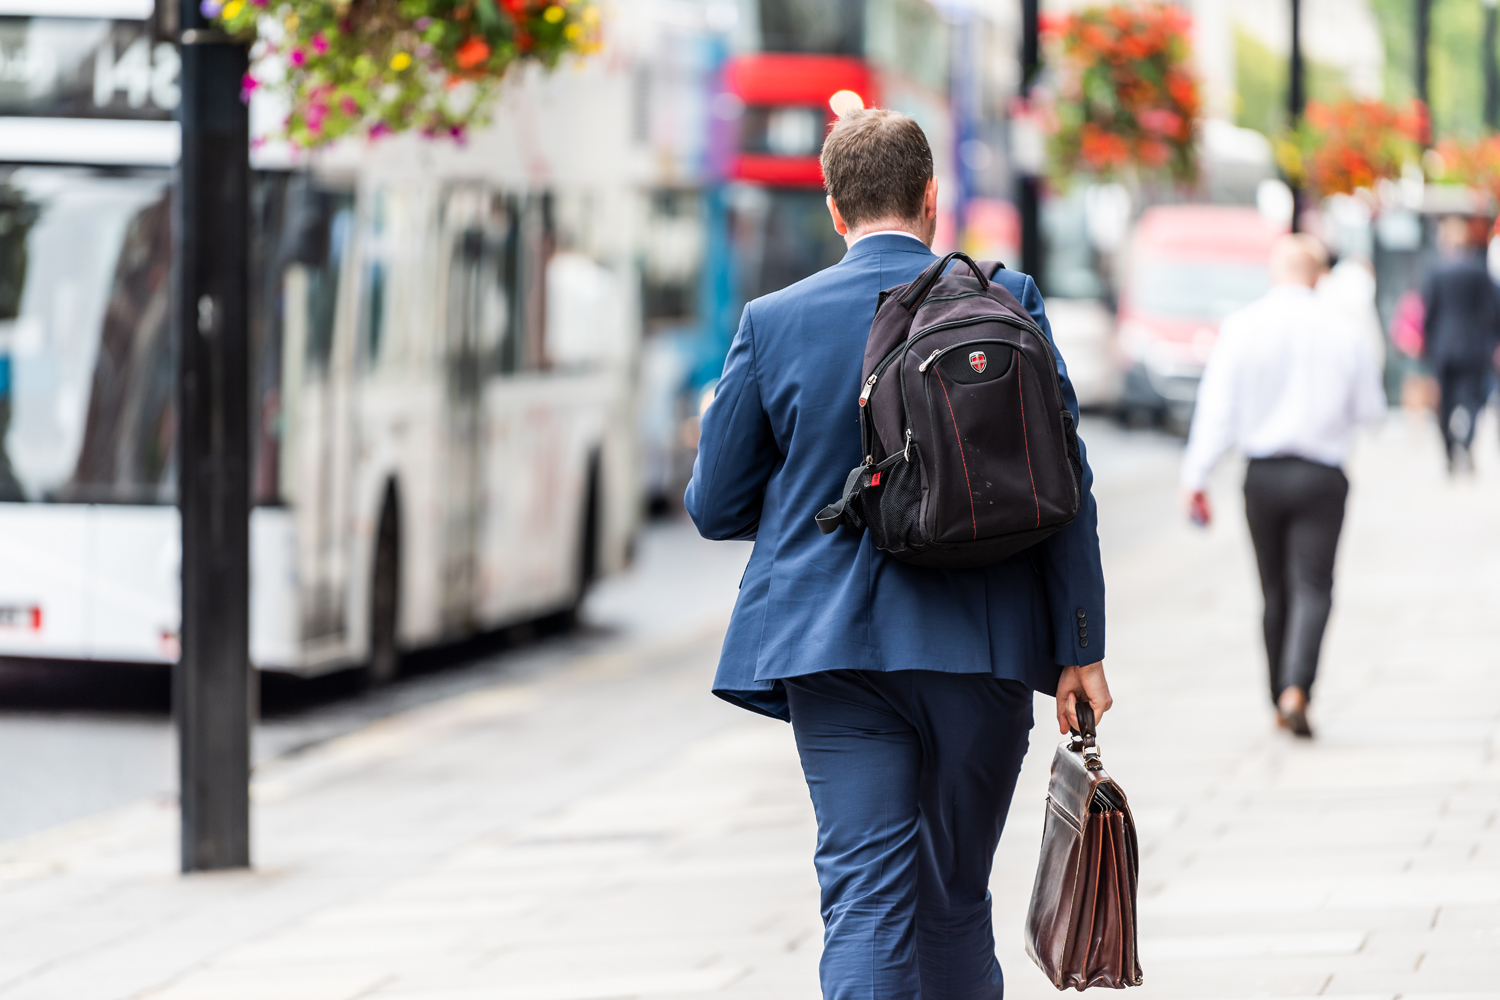 Backpack vs. Briefcase: Which Is Better for Work? - The Manual